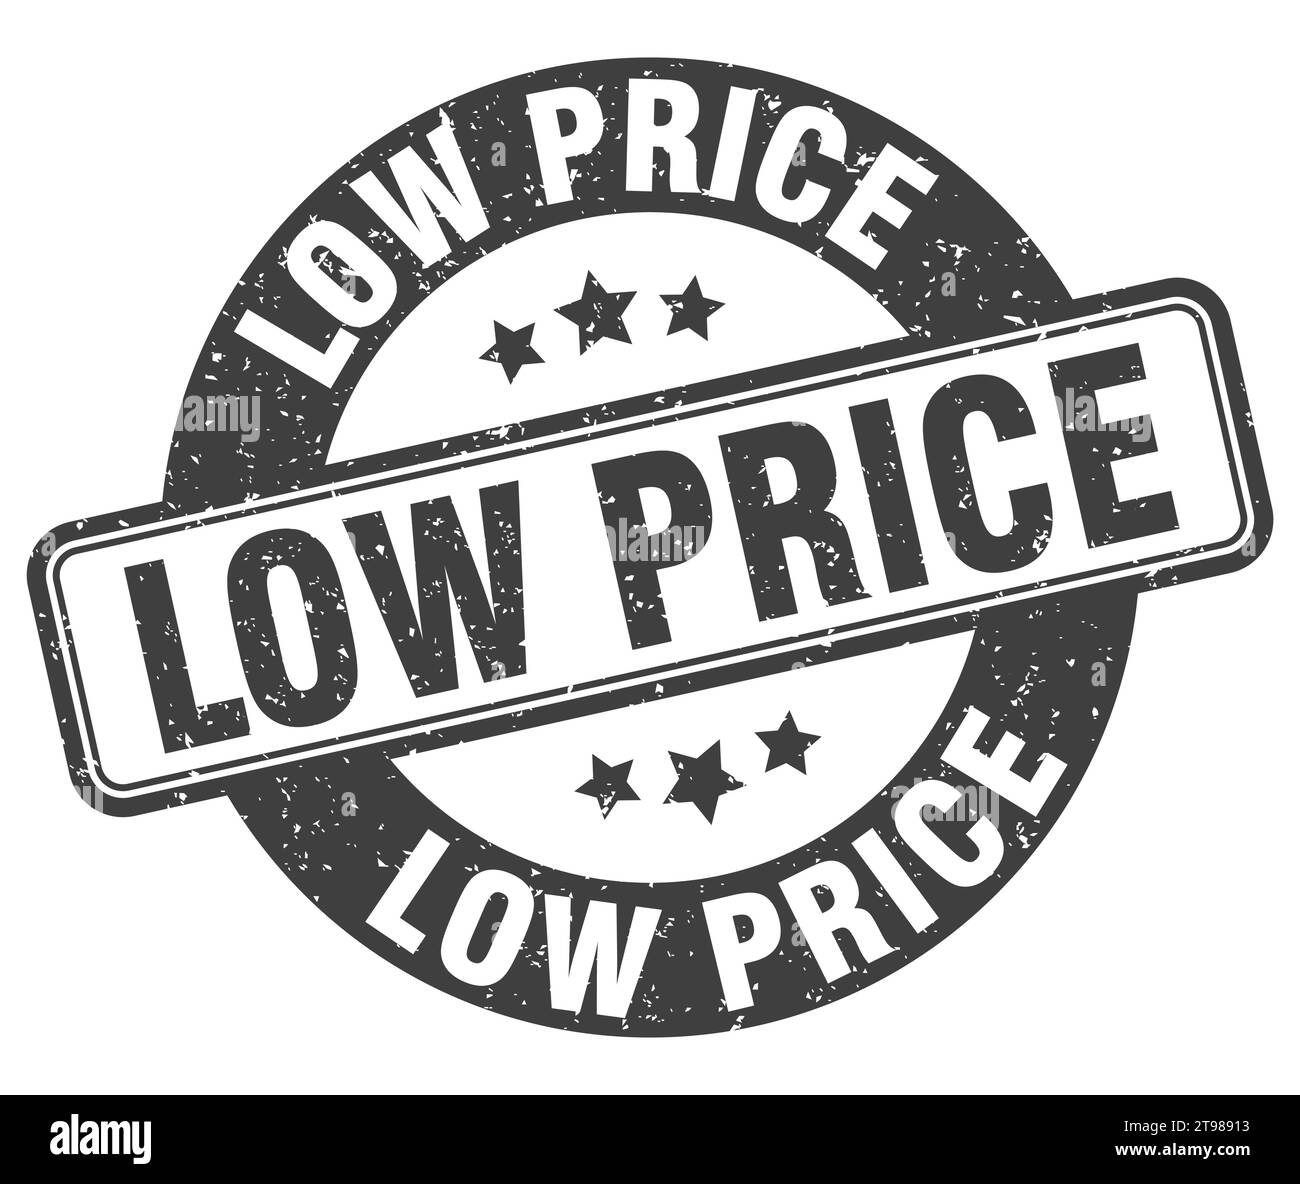 low price stamp. low price sign. round grunge label Stock Vector